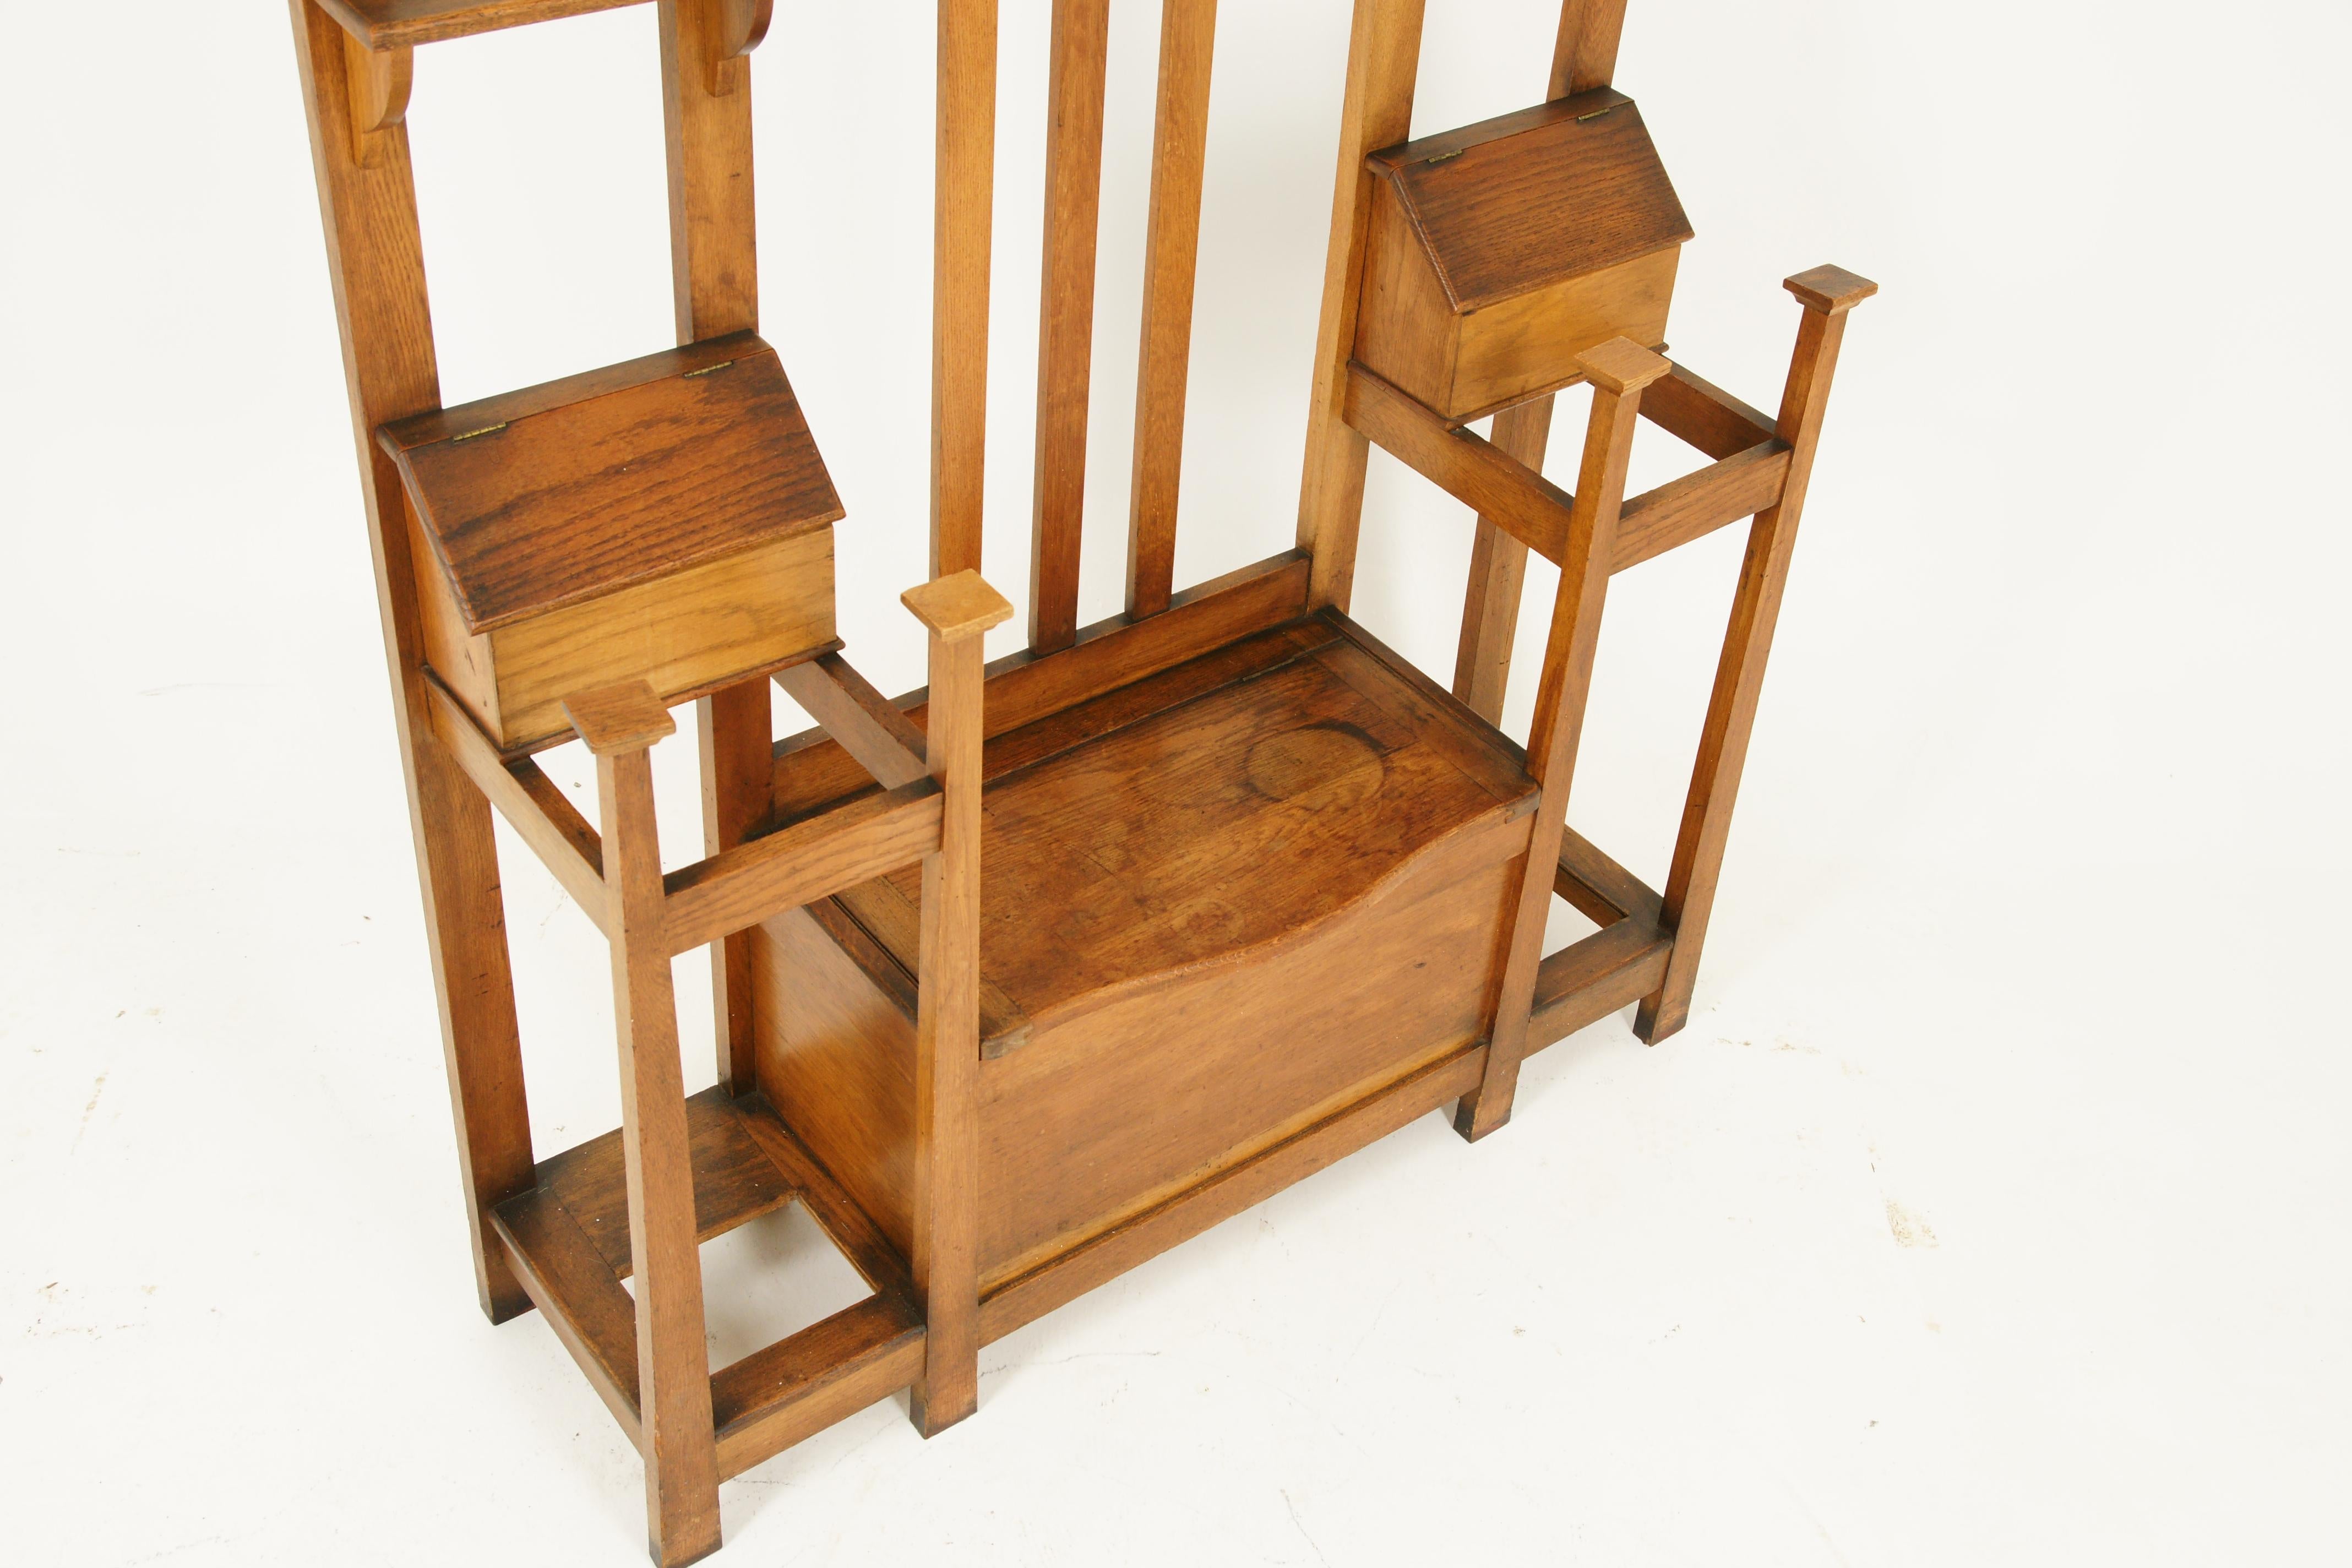 Hand-Crafted Antique Oak Hall Tree, Arts & Crafts, Double Sided, Seat, Scotland, 1900, B1715